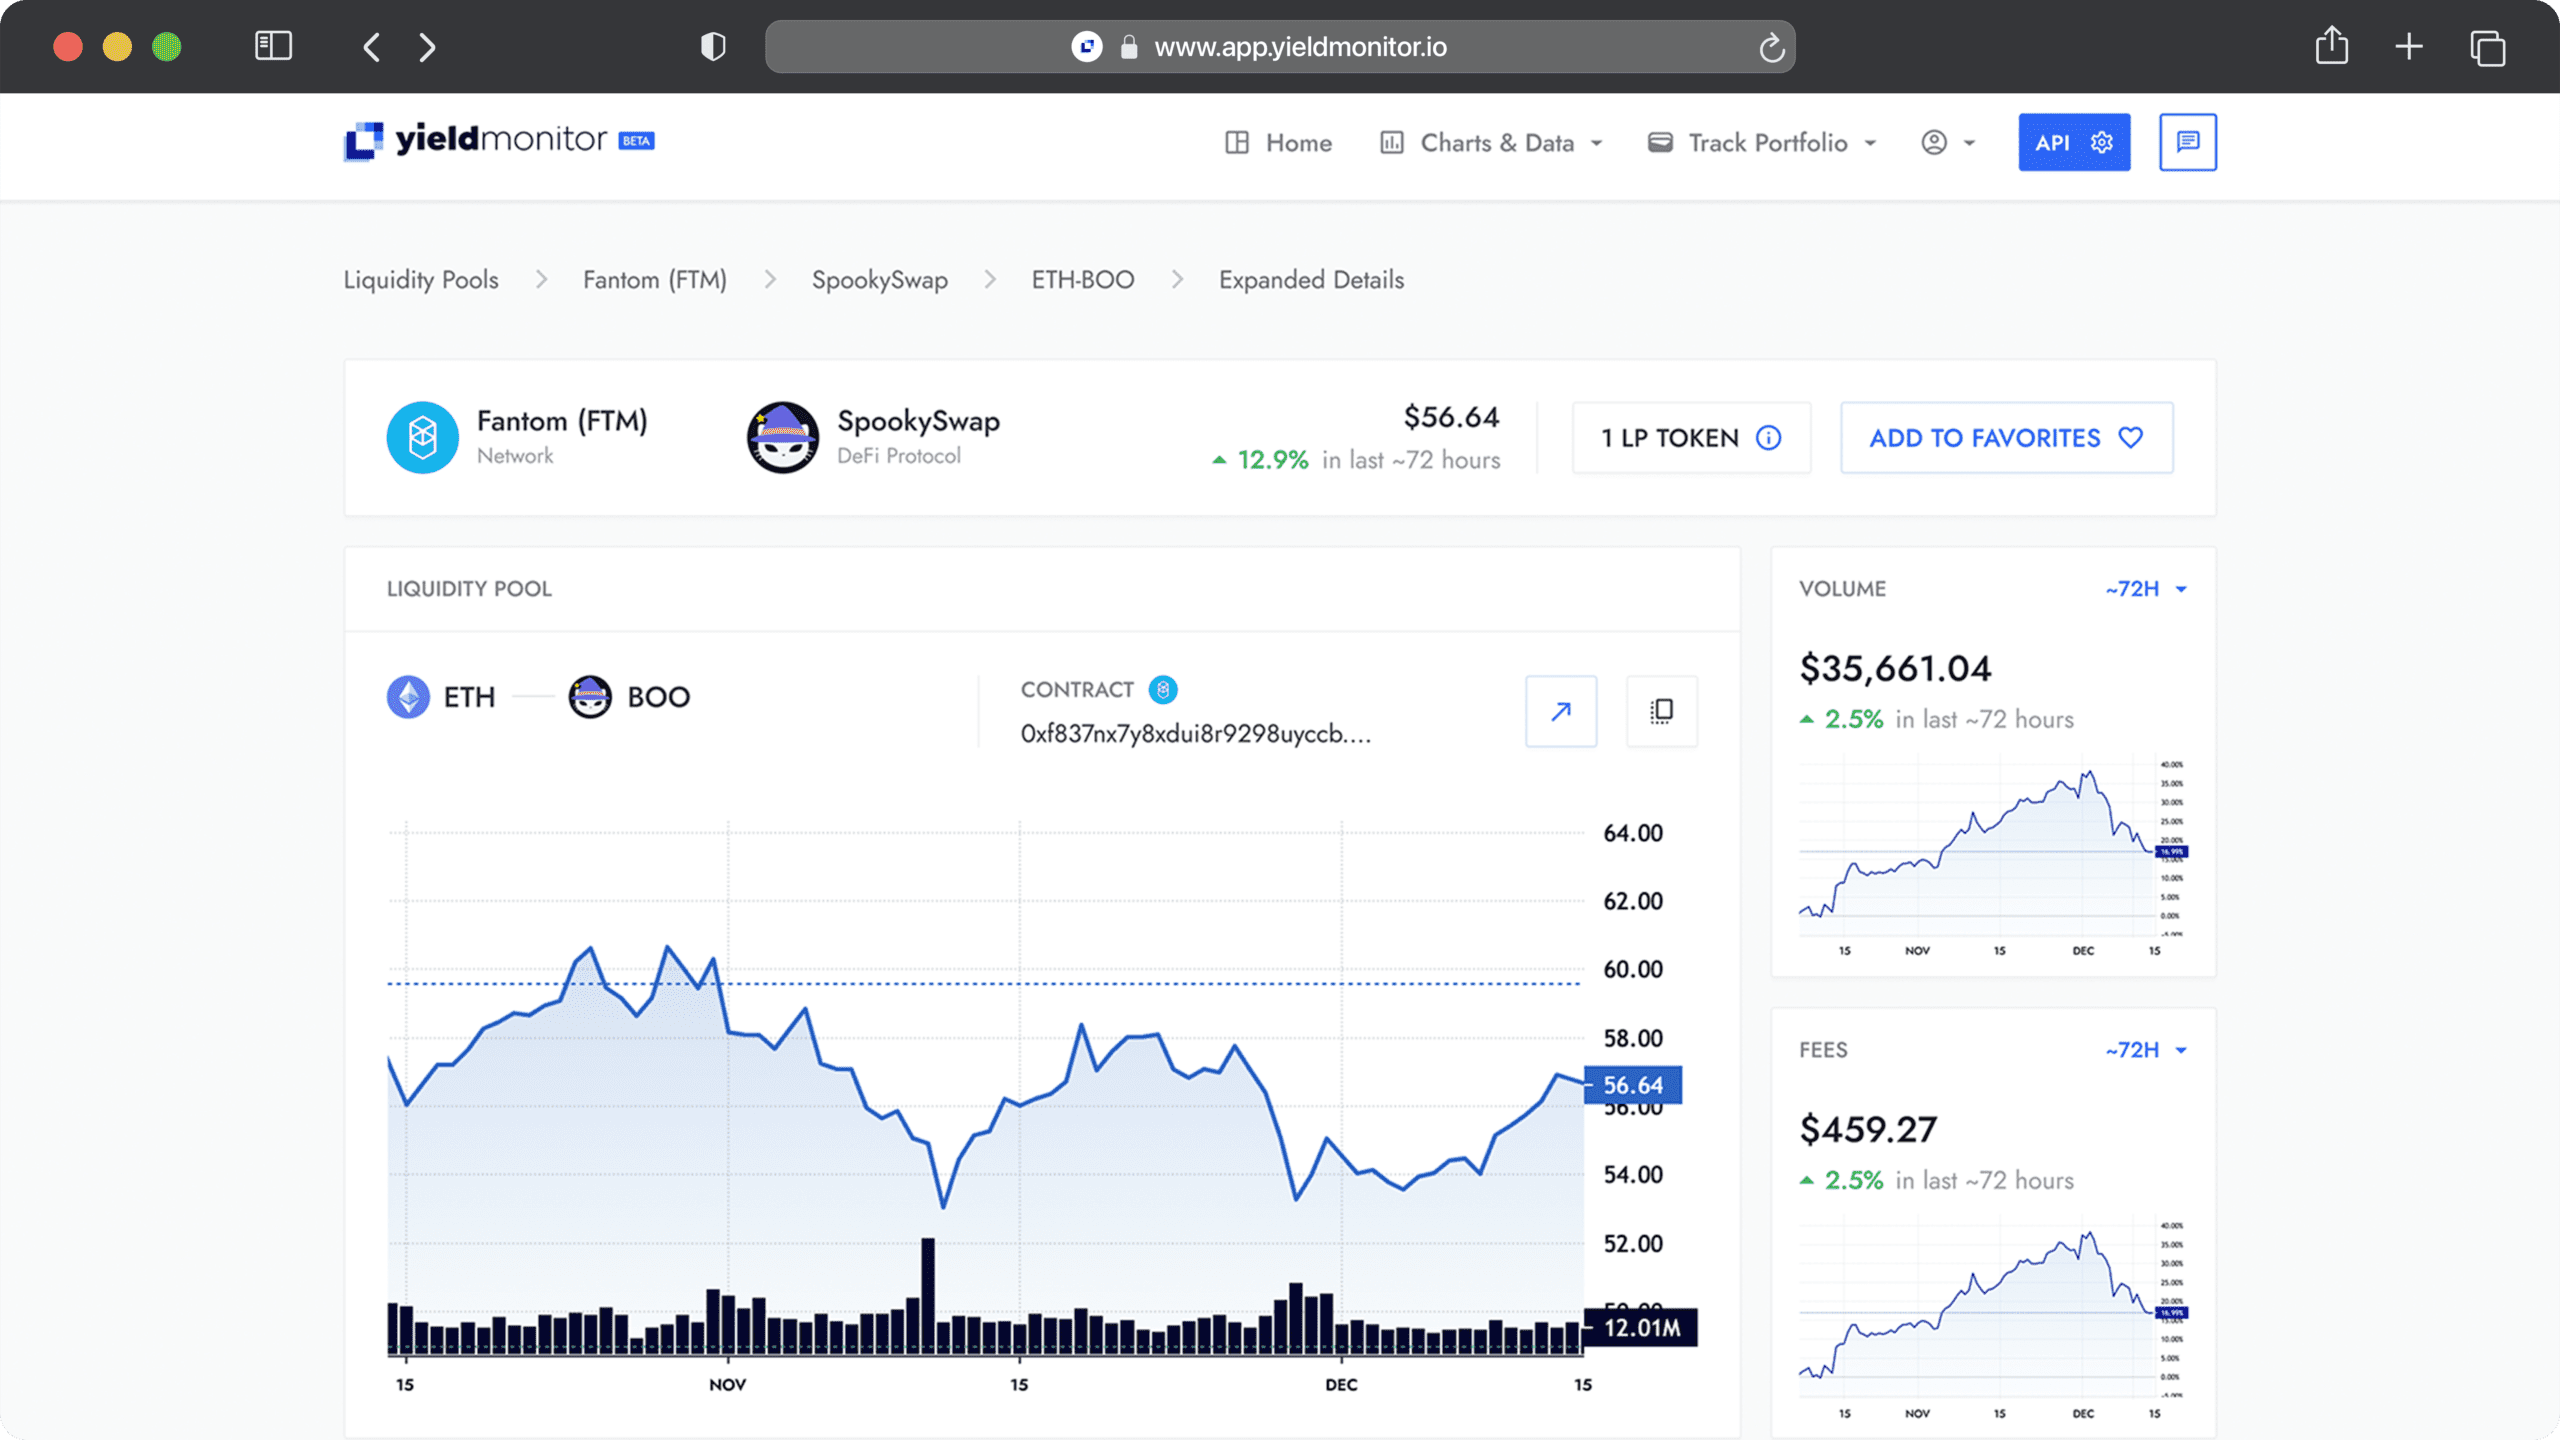 Yield Monitor — Fantom Network — Browser Mock — Liquidity Pool Expanded Details